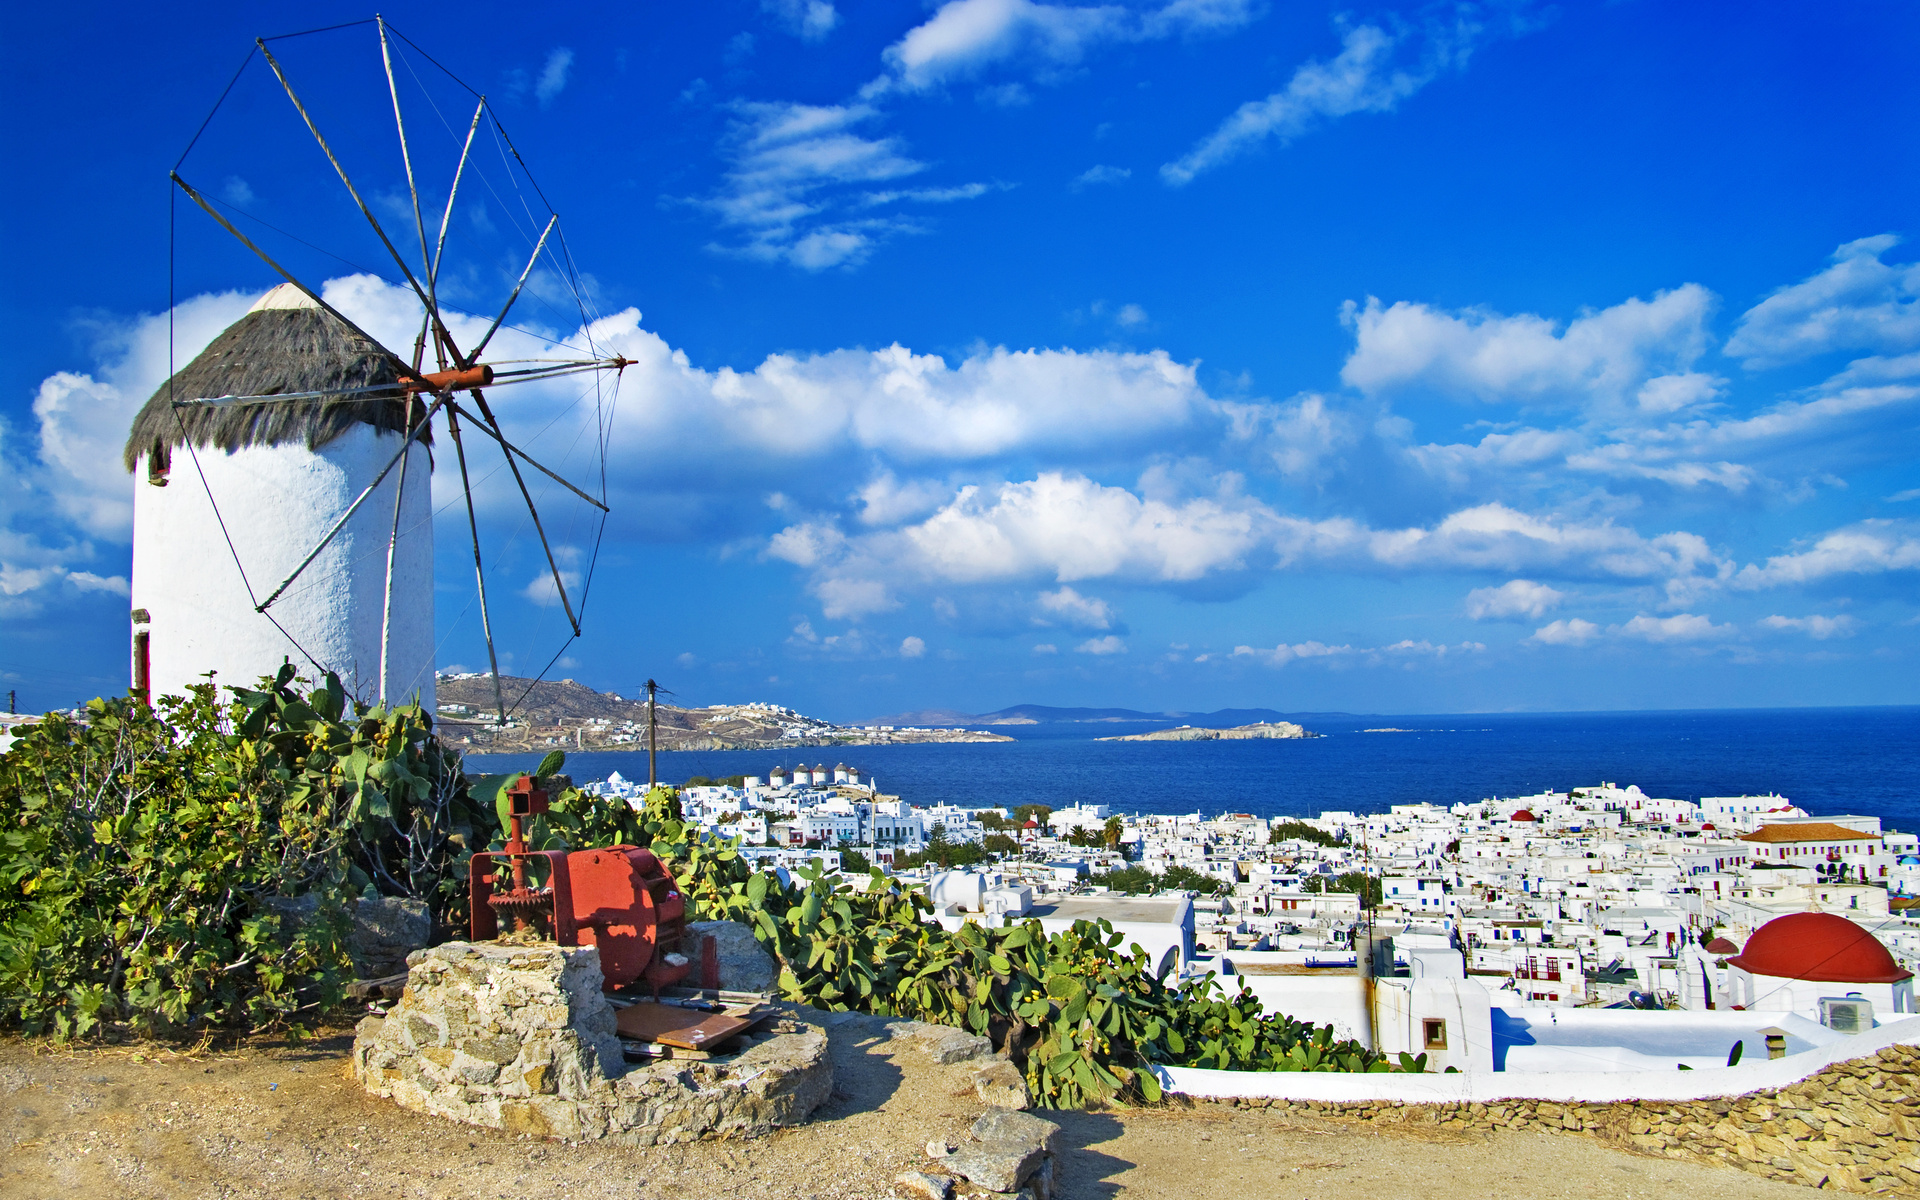 santorini, summer, landscape, sea, architecture, resort, nature, church, style, europe, hill, greece, mykonos, sunny, romantic, hotel, man made, city, aegean, blue, building, culture, cute, cyclades, cycladic, greek, holiday, house, island, mountain, restaurant, roof, sky, touristic, town, tropical, white, windmill, cities